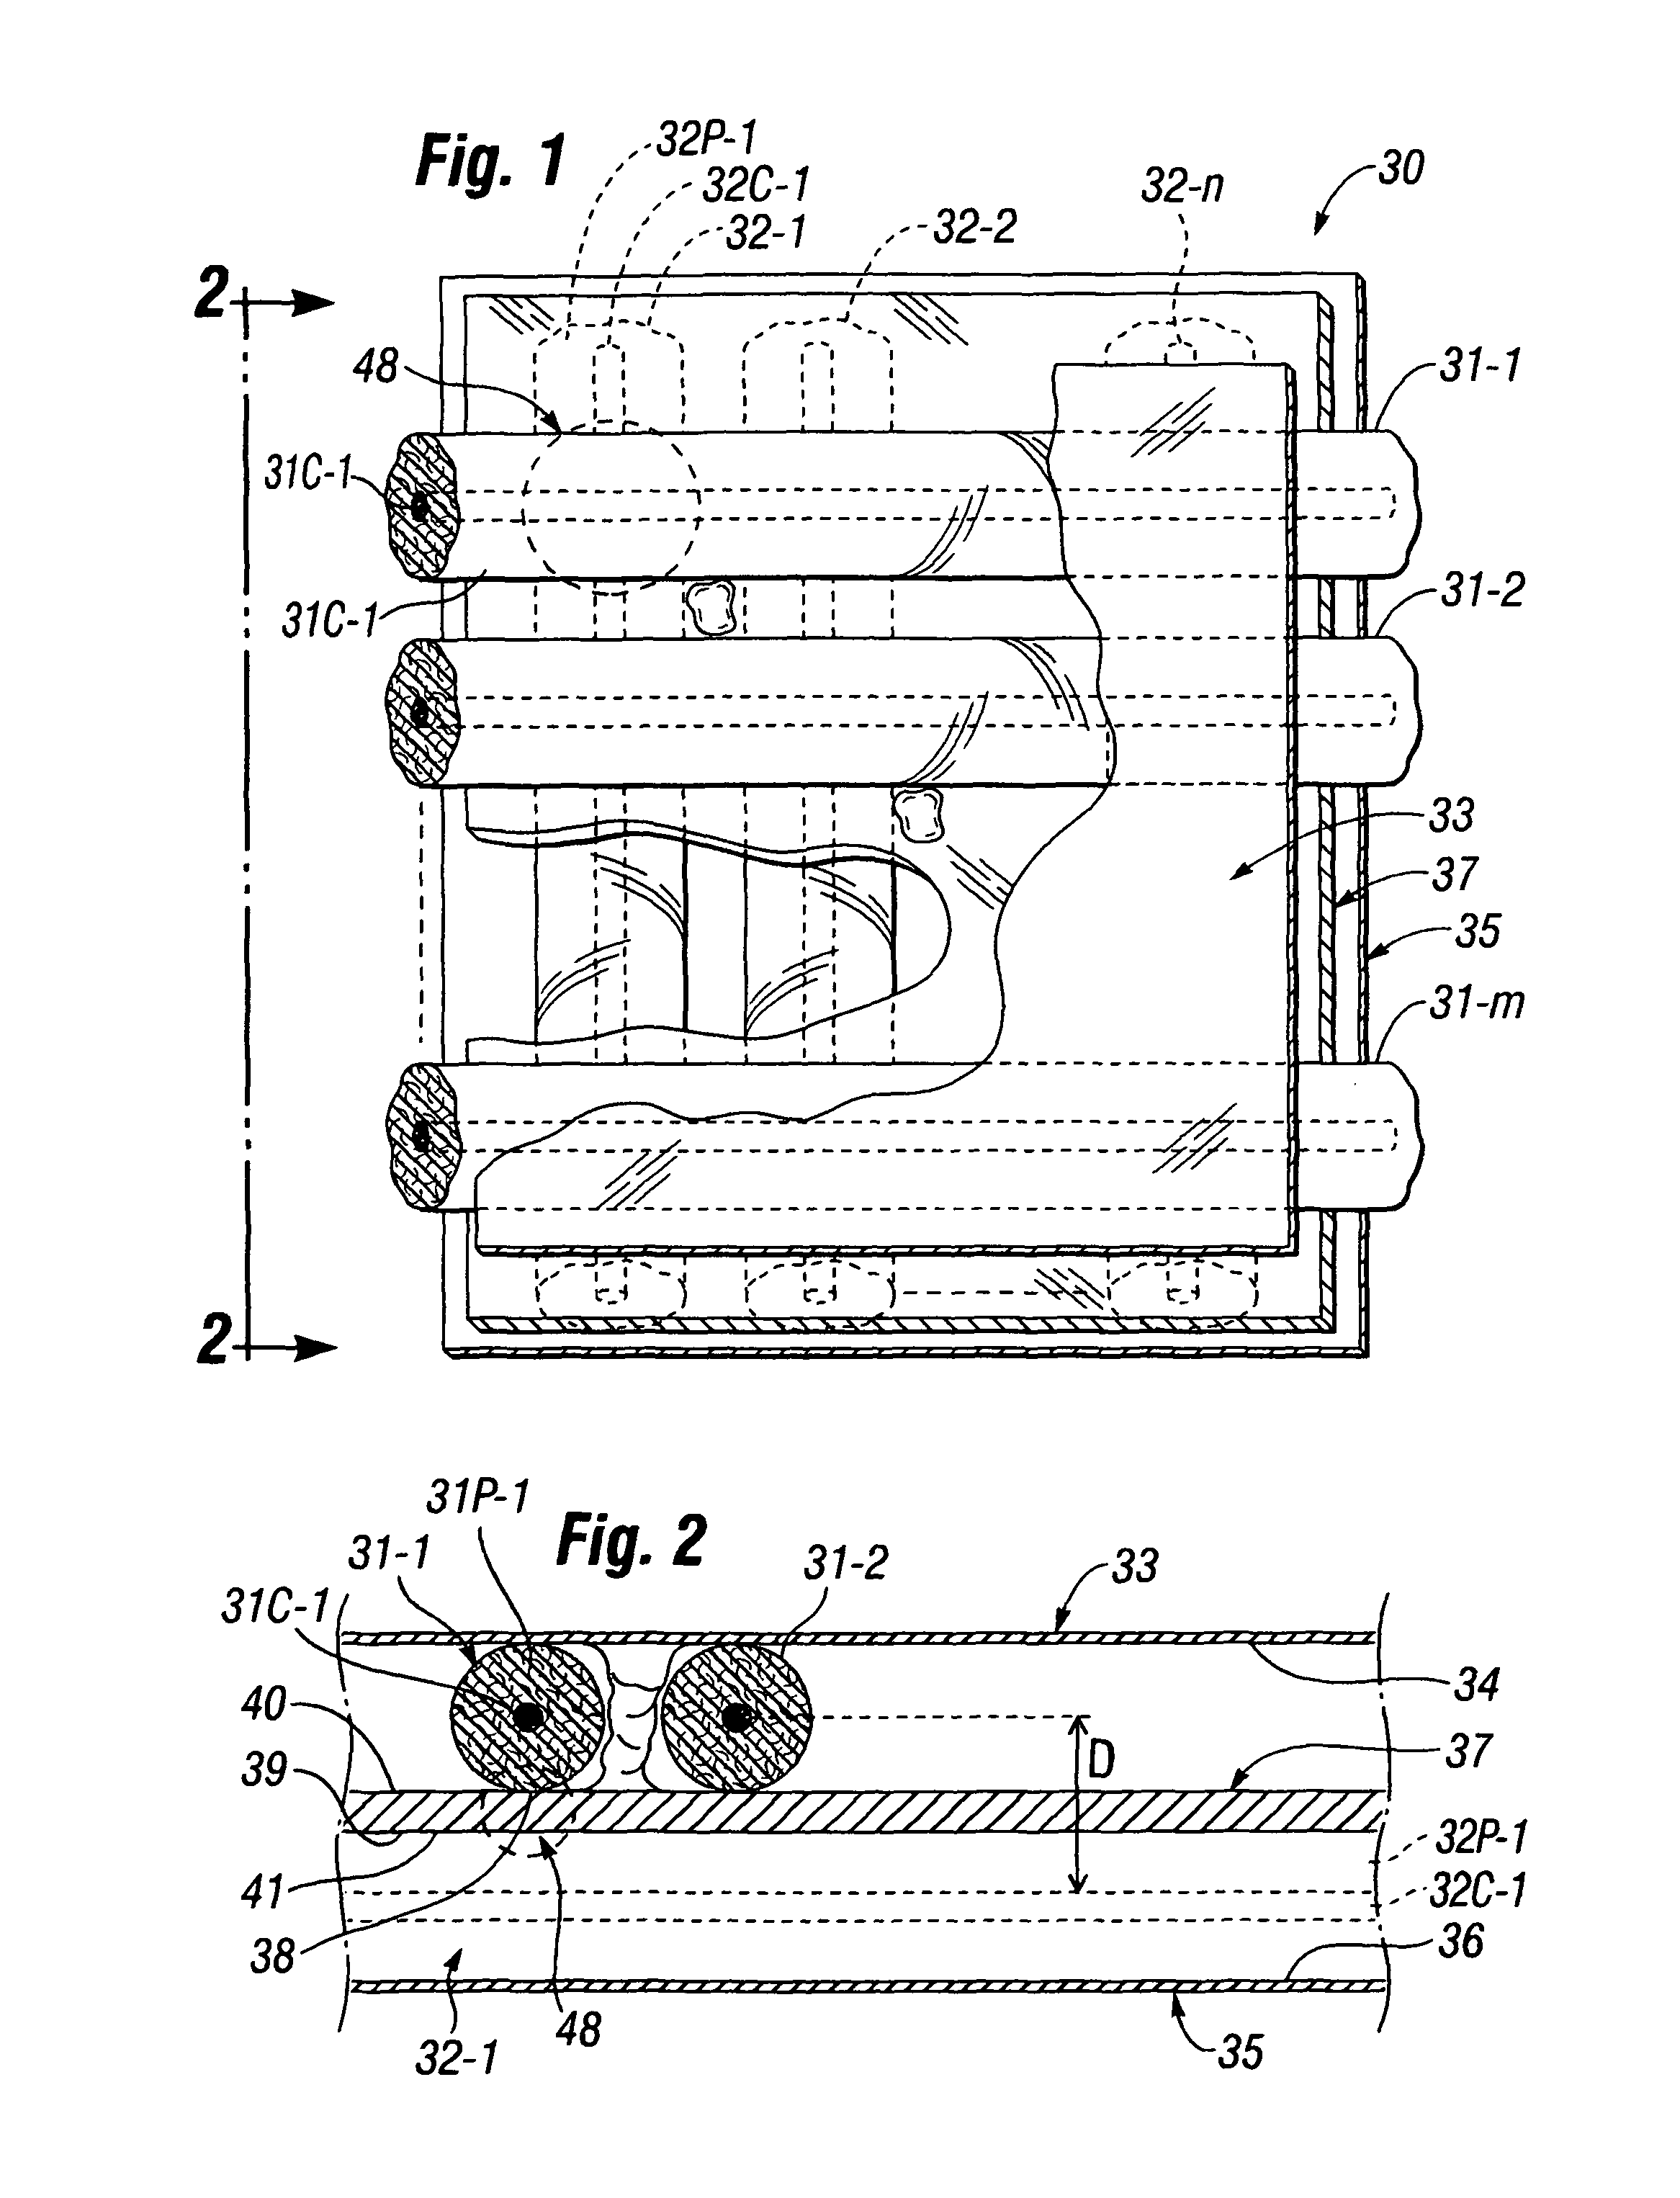 Elastically stretchable fabric force sensor arrays and methods of making